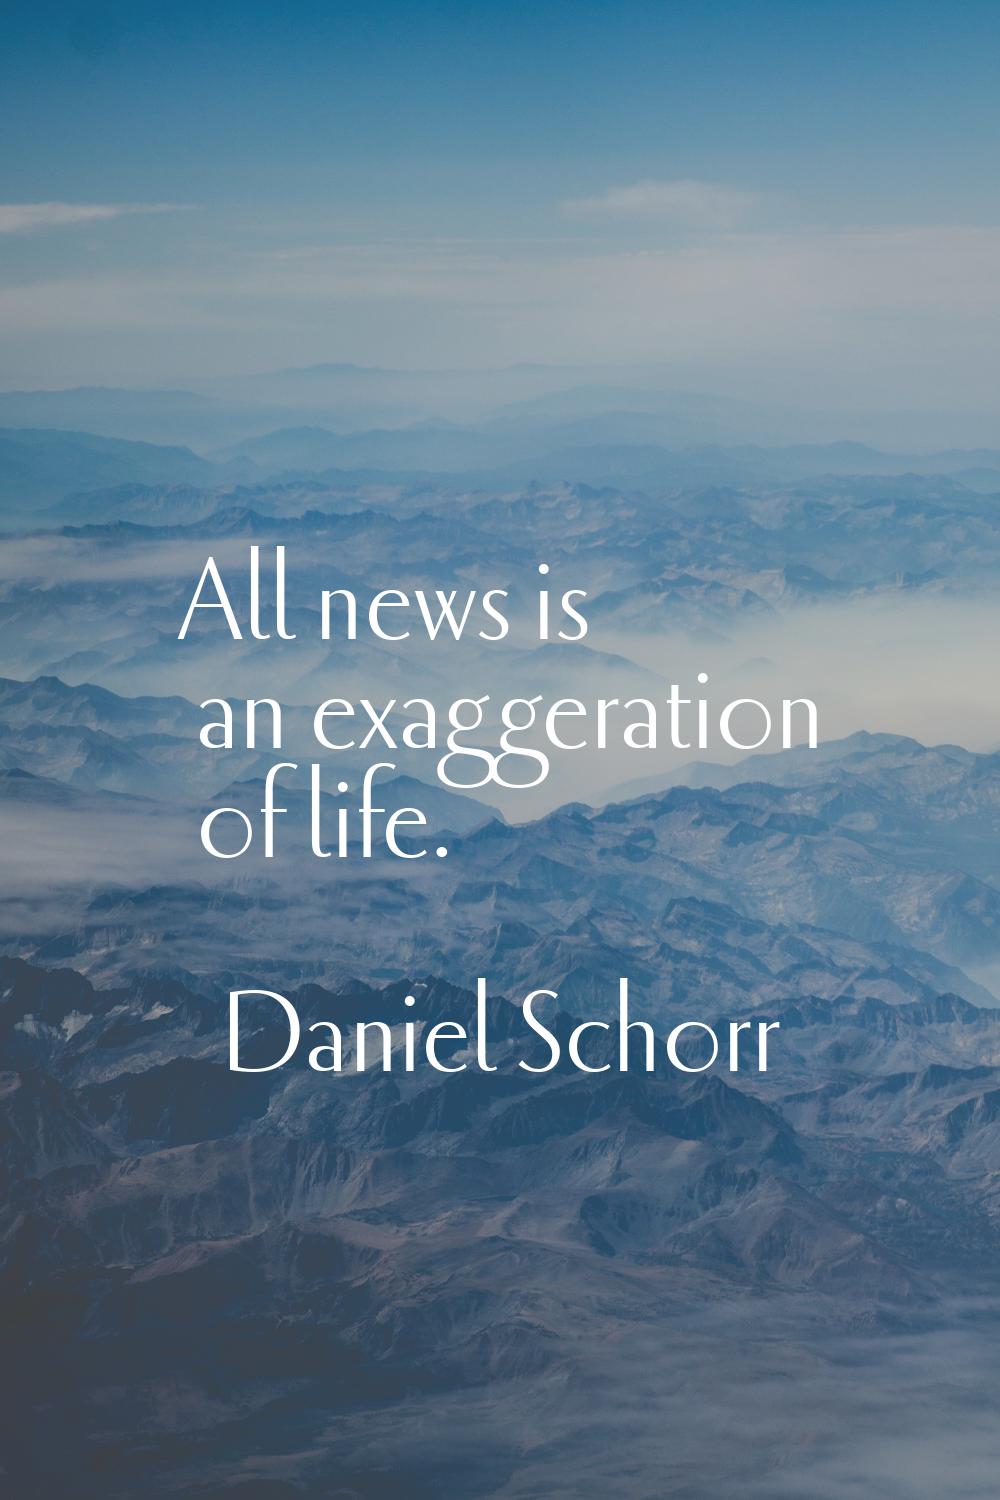 All news is an exaggeration of life.